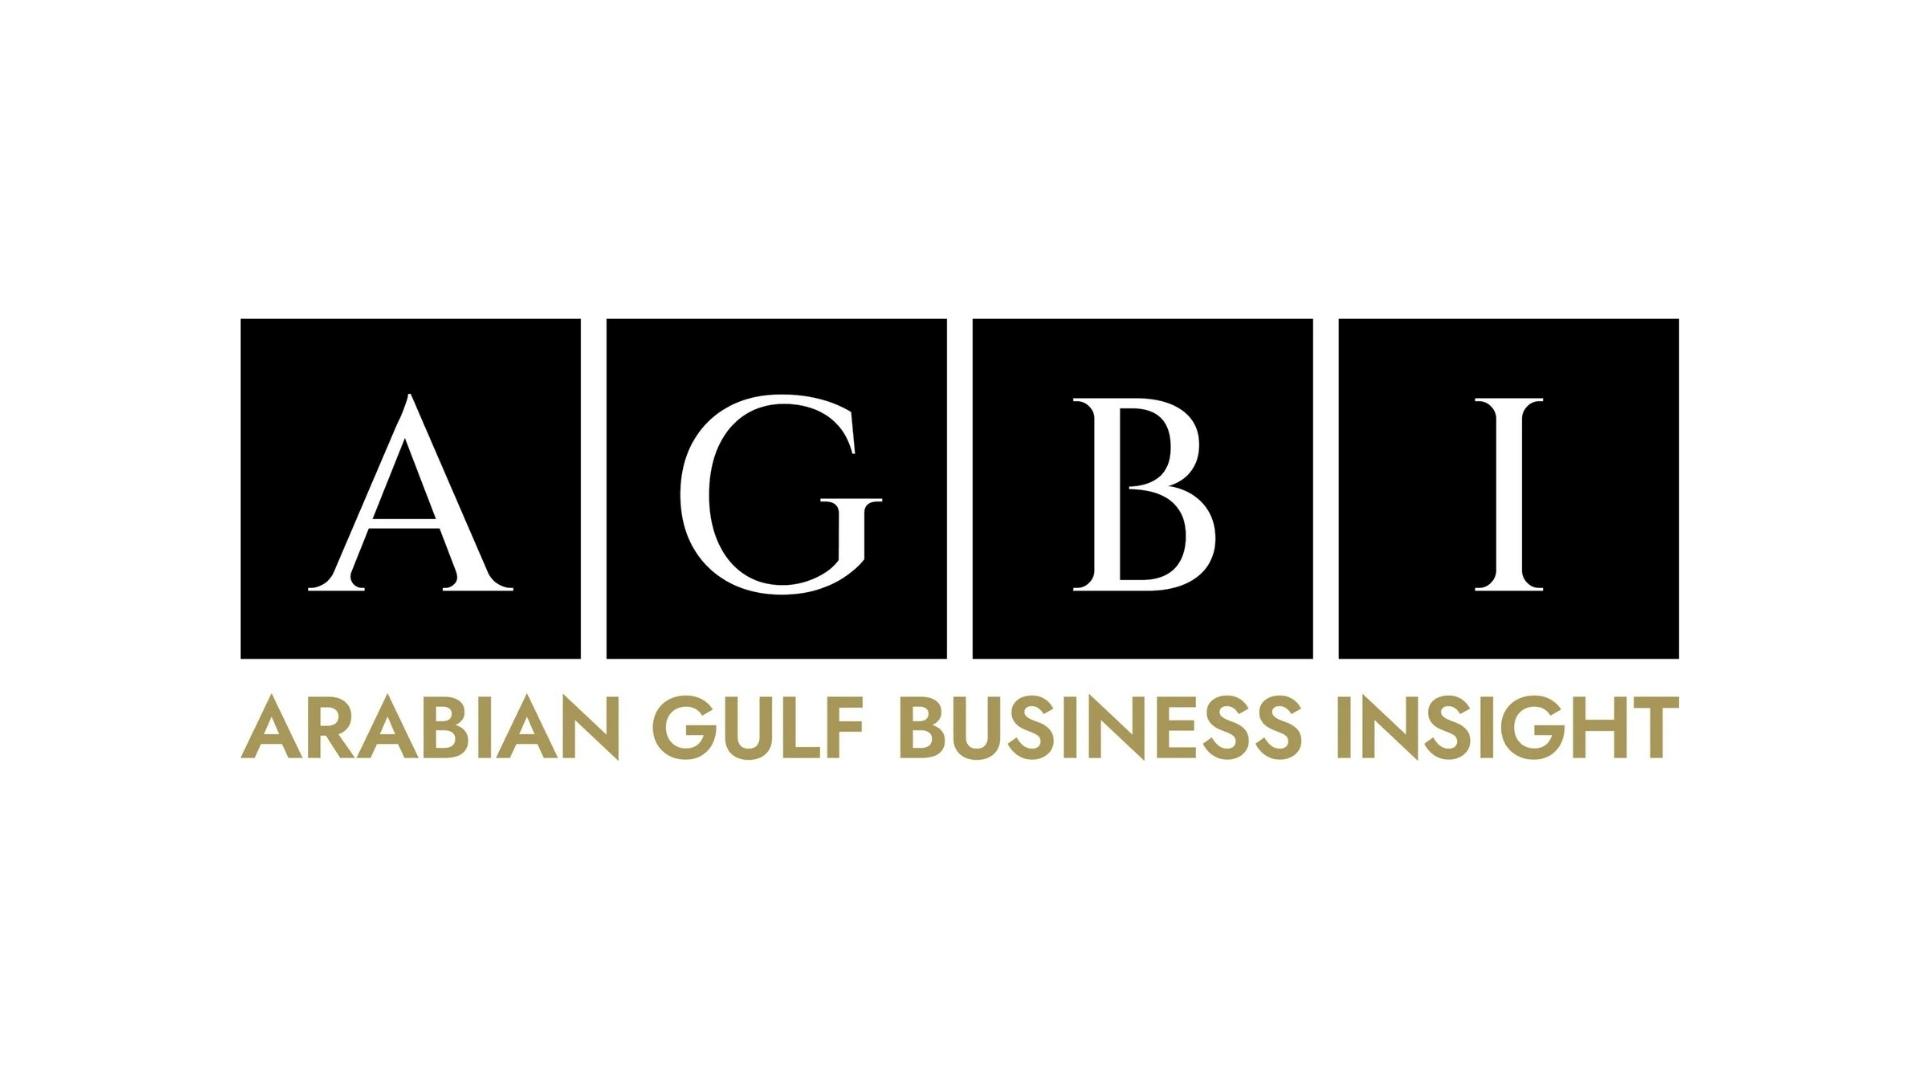 Arabian Gulf Business Insight | Egypt’s ‘Golden License’ bonanza aims to plug ailing private sector